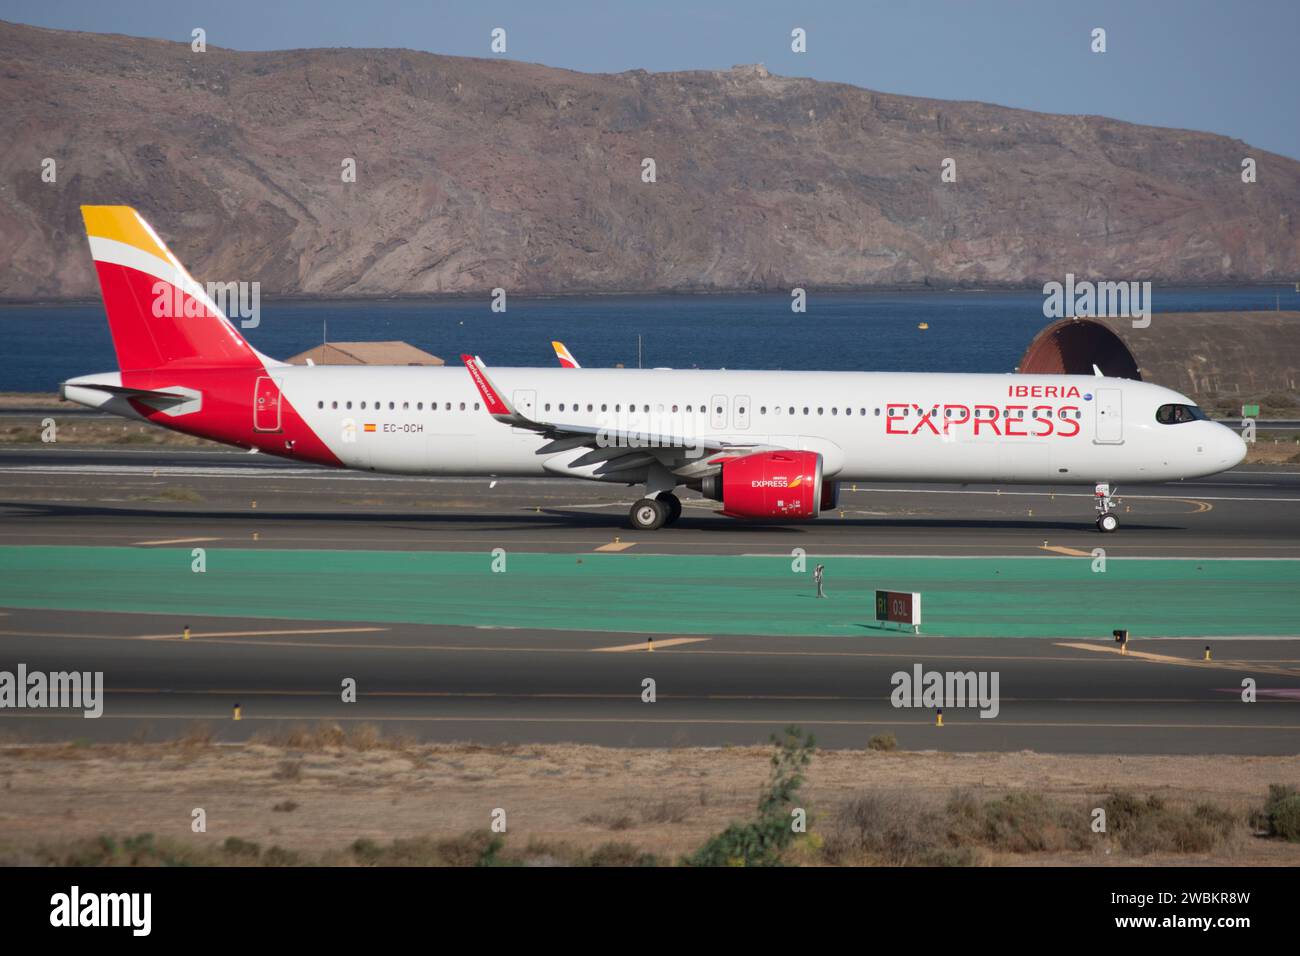 Airbus A321 neo airliner of the Iberia Express airline Stock Photo